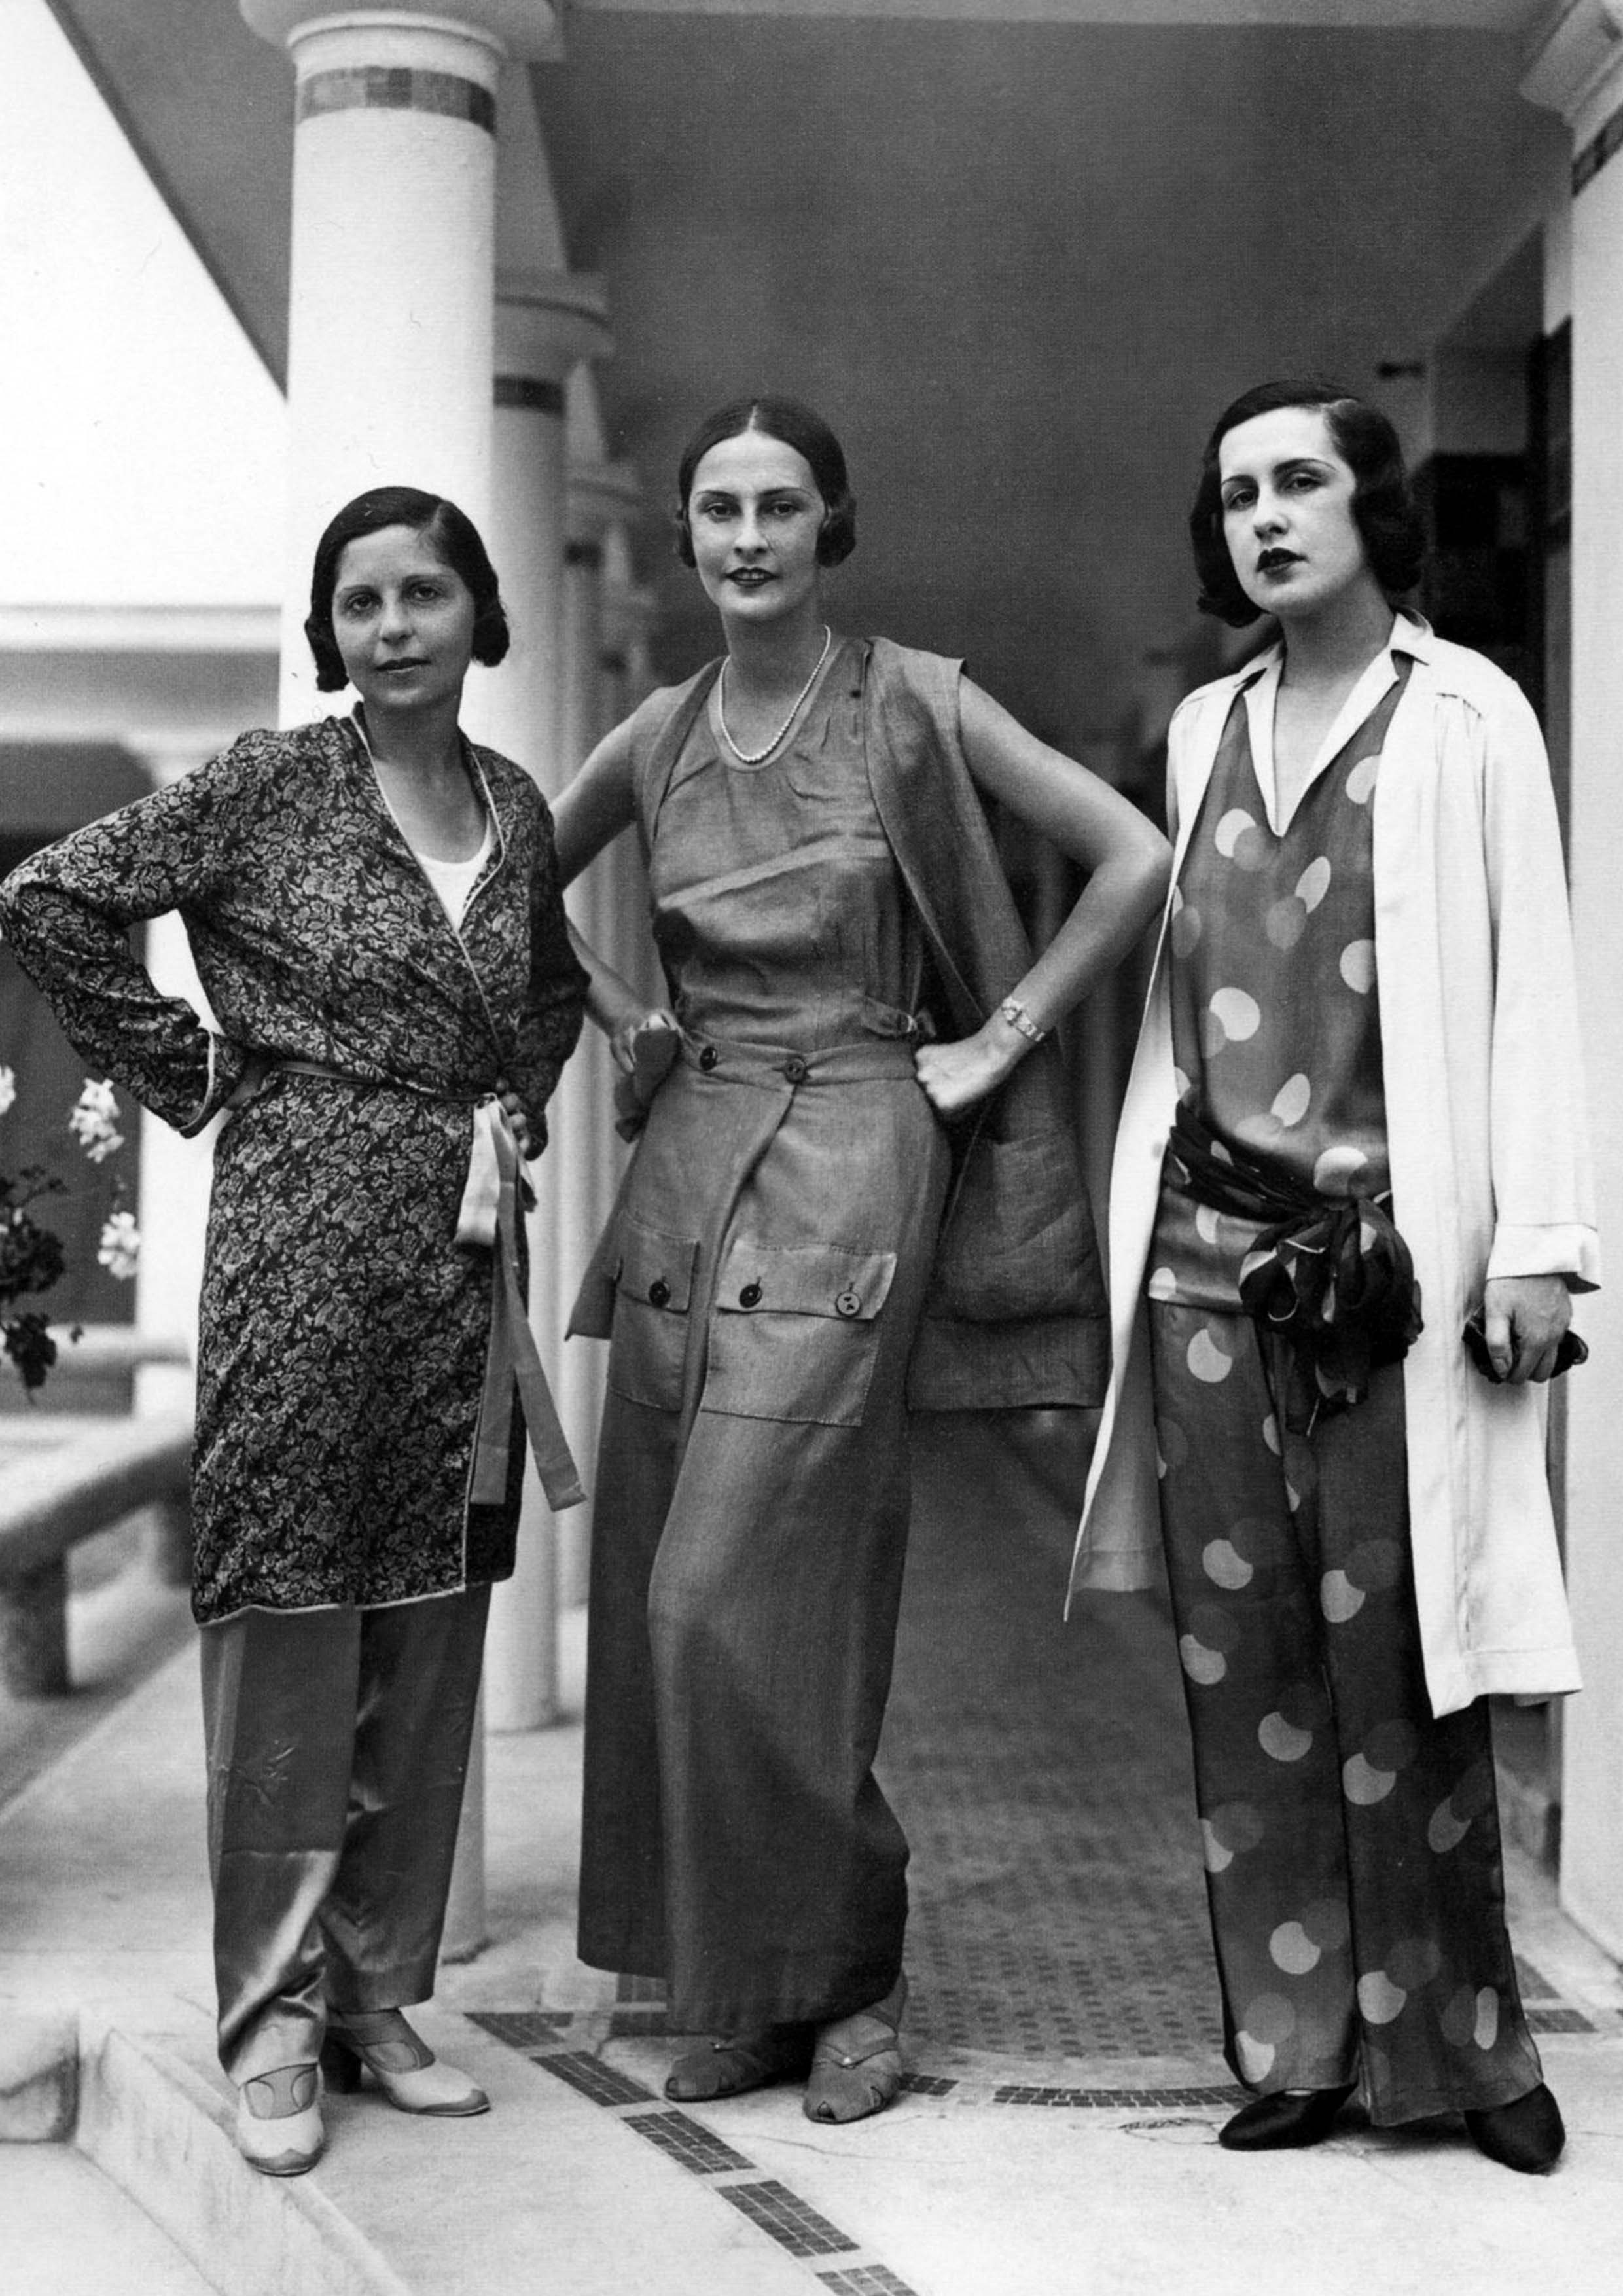 Two women from the 1920s both in mannish suits including wideleg trousers  a tie the jacket and hats  1920s fashion women 1920 women 1920s women